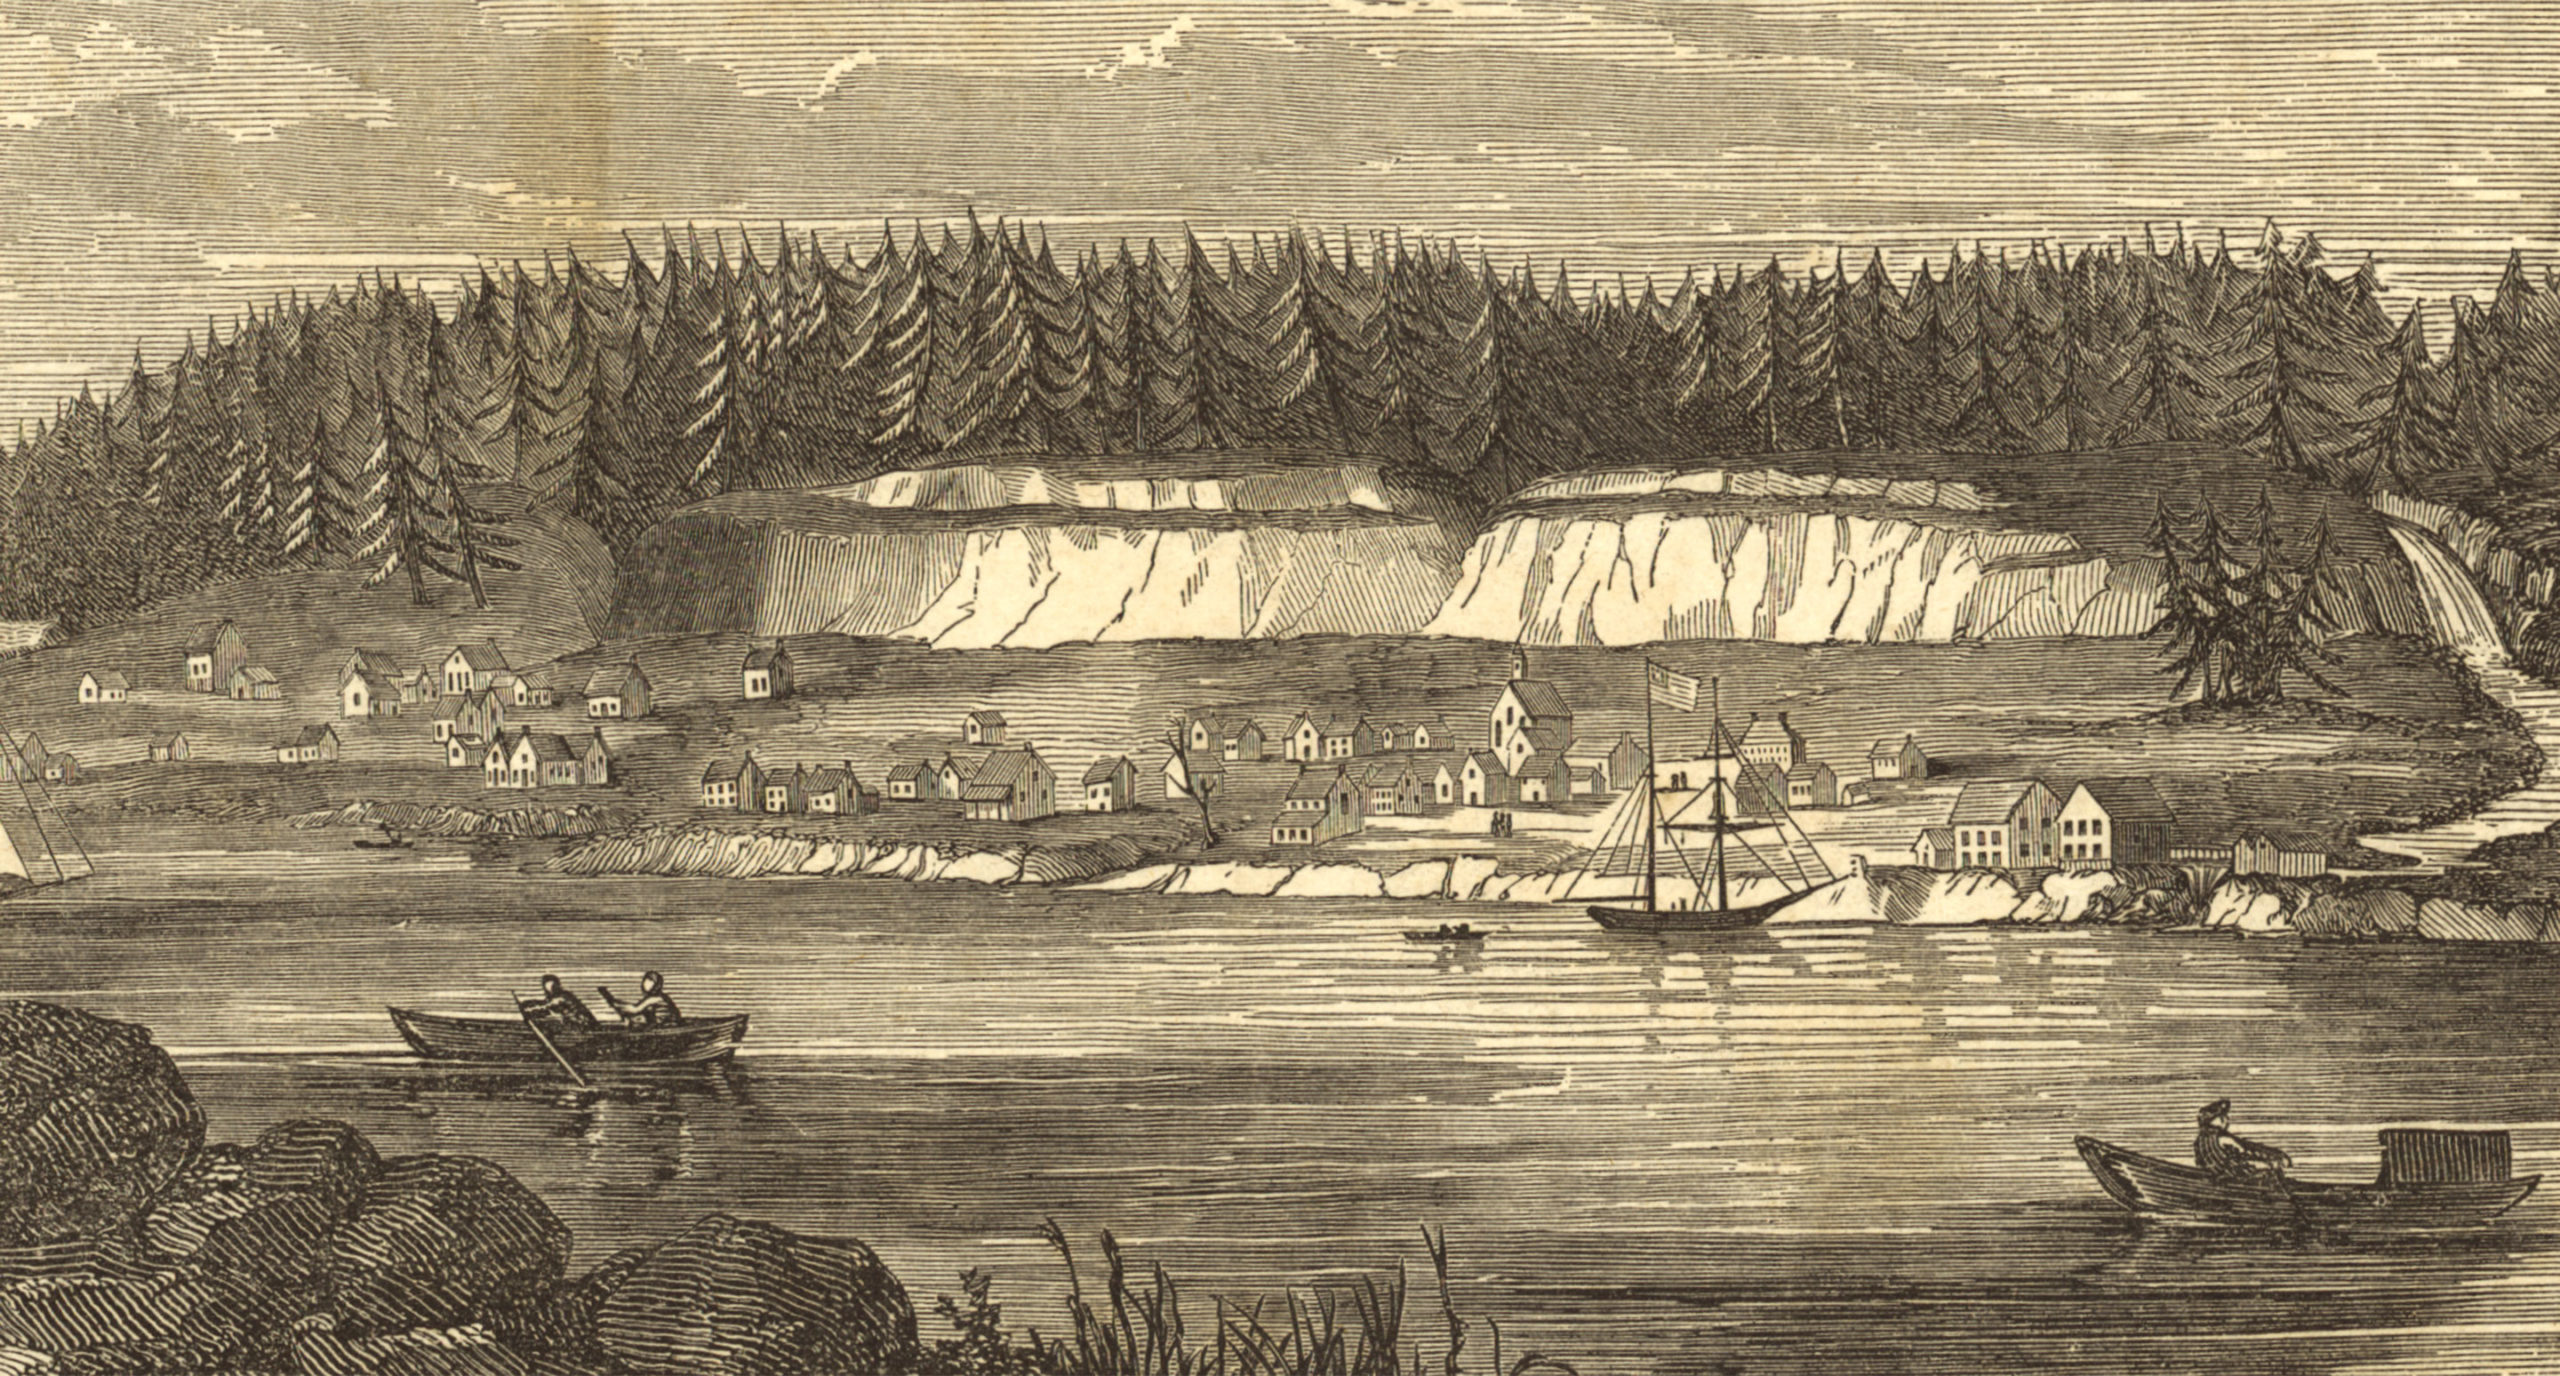 Historical etching of an Oregon township on a river.